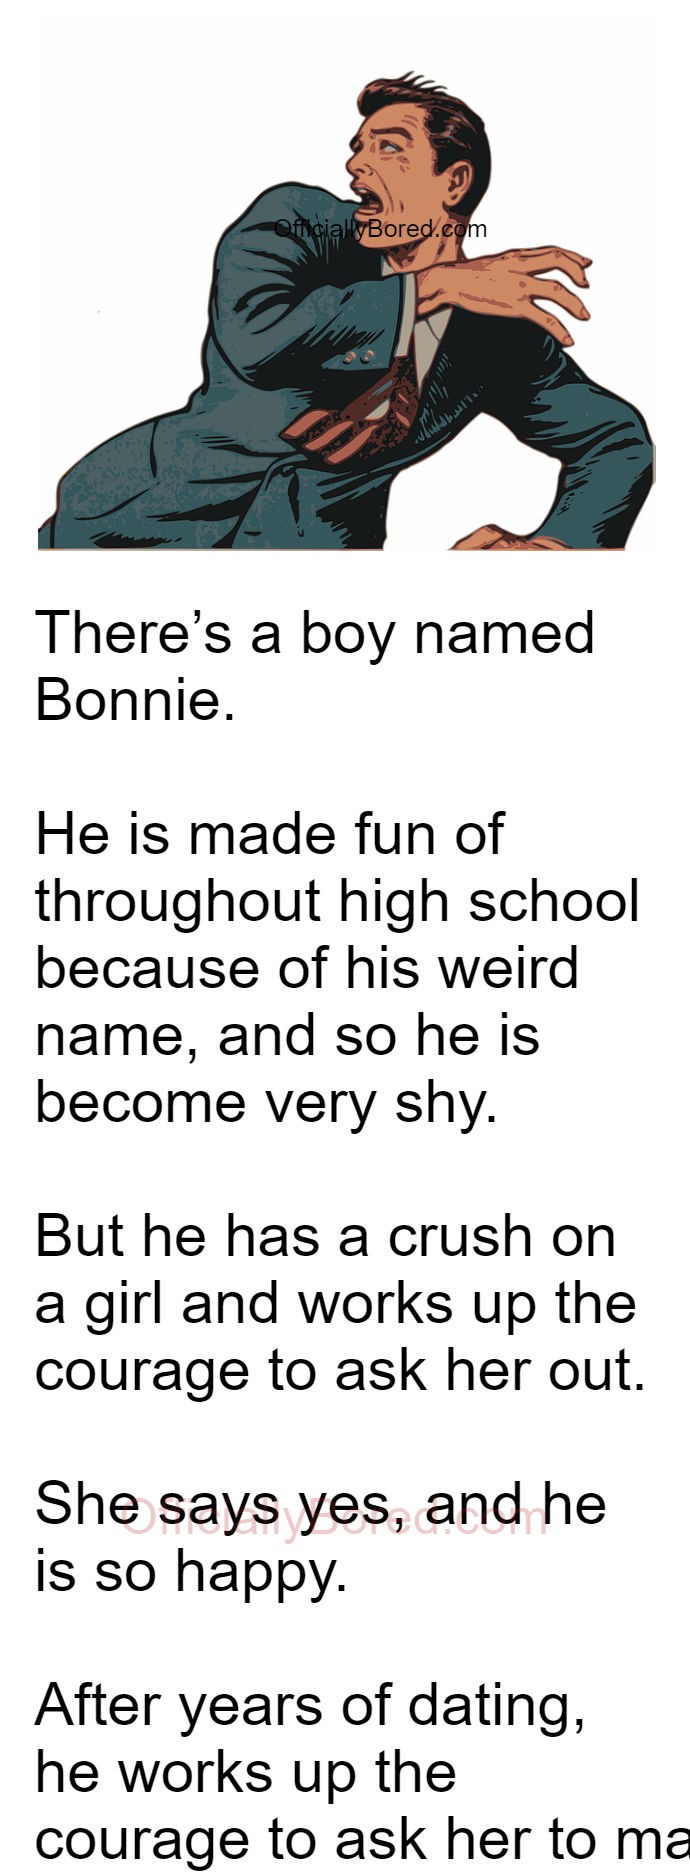 There's a Boy named Bonnie | OfficiallyBored